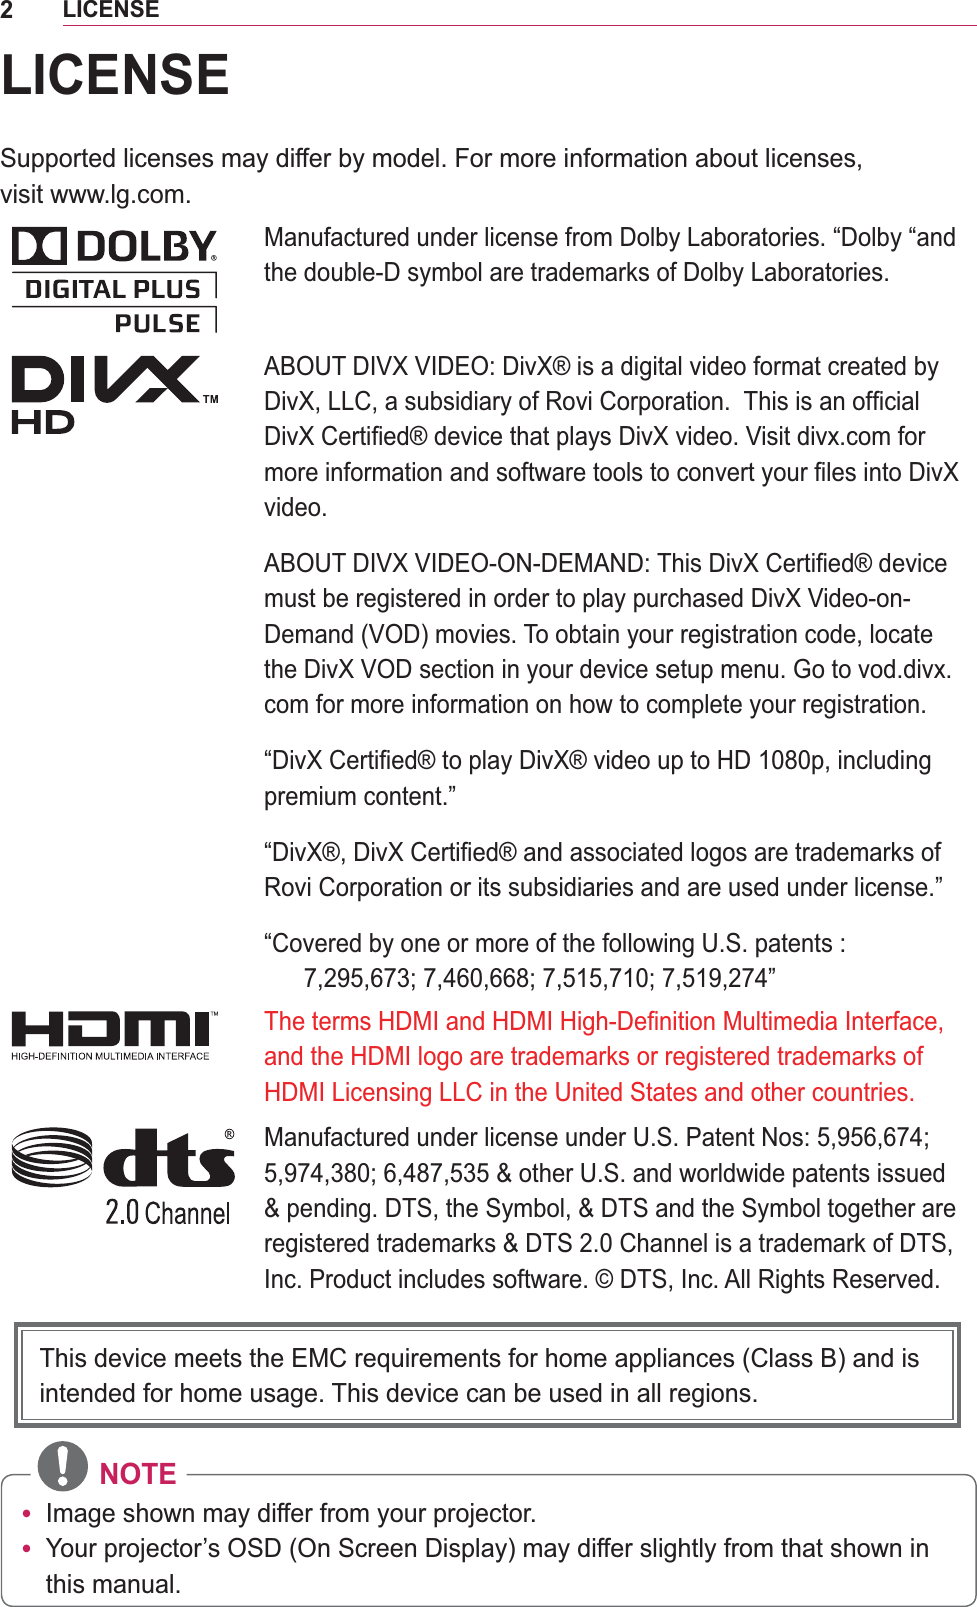 2LICENSELICENSESupported licenses may differ by model. For more information about licenses,  visit www.lg.com.Manufactured under license from Dolby Laboratories. “Dolby “and the double-D symbol are trademarks of Dolby Laboratories.ABOUT DIVX VIDEO: DivX® is a digital video format created by video.must be registered in order to play purchased DivX Video-on-Demand (VOD) movies. To obtain your registration code, locate com for more information on how to complete your registration. premium content.”Rovi Corporation or its subsidiaries and are used under license.”“Covered by one or more of the following U.S. patents :  Manufactured under license under U.S. Patent Nos: 5,956,674; Inc. Product includes software. © DTS, Inc. All Rights Reserved. NOTEy Image shown may differ from your projector.y Your projector’s OSD (On Screen Display) may differ slightly from that shown in this manual.This device meets the EMC requirements for home appliances (Class B) and is intended for home usage. This device can be used in all regions.